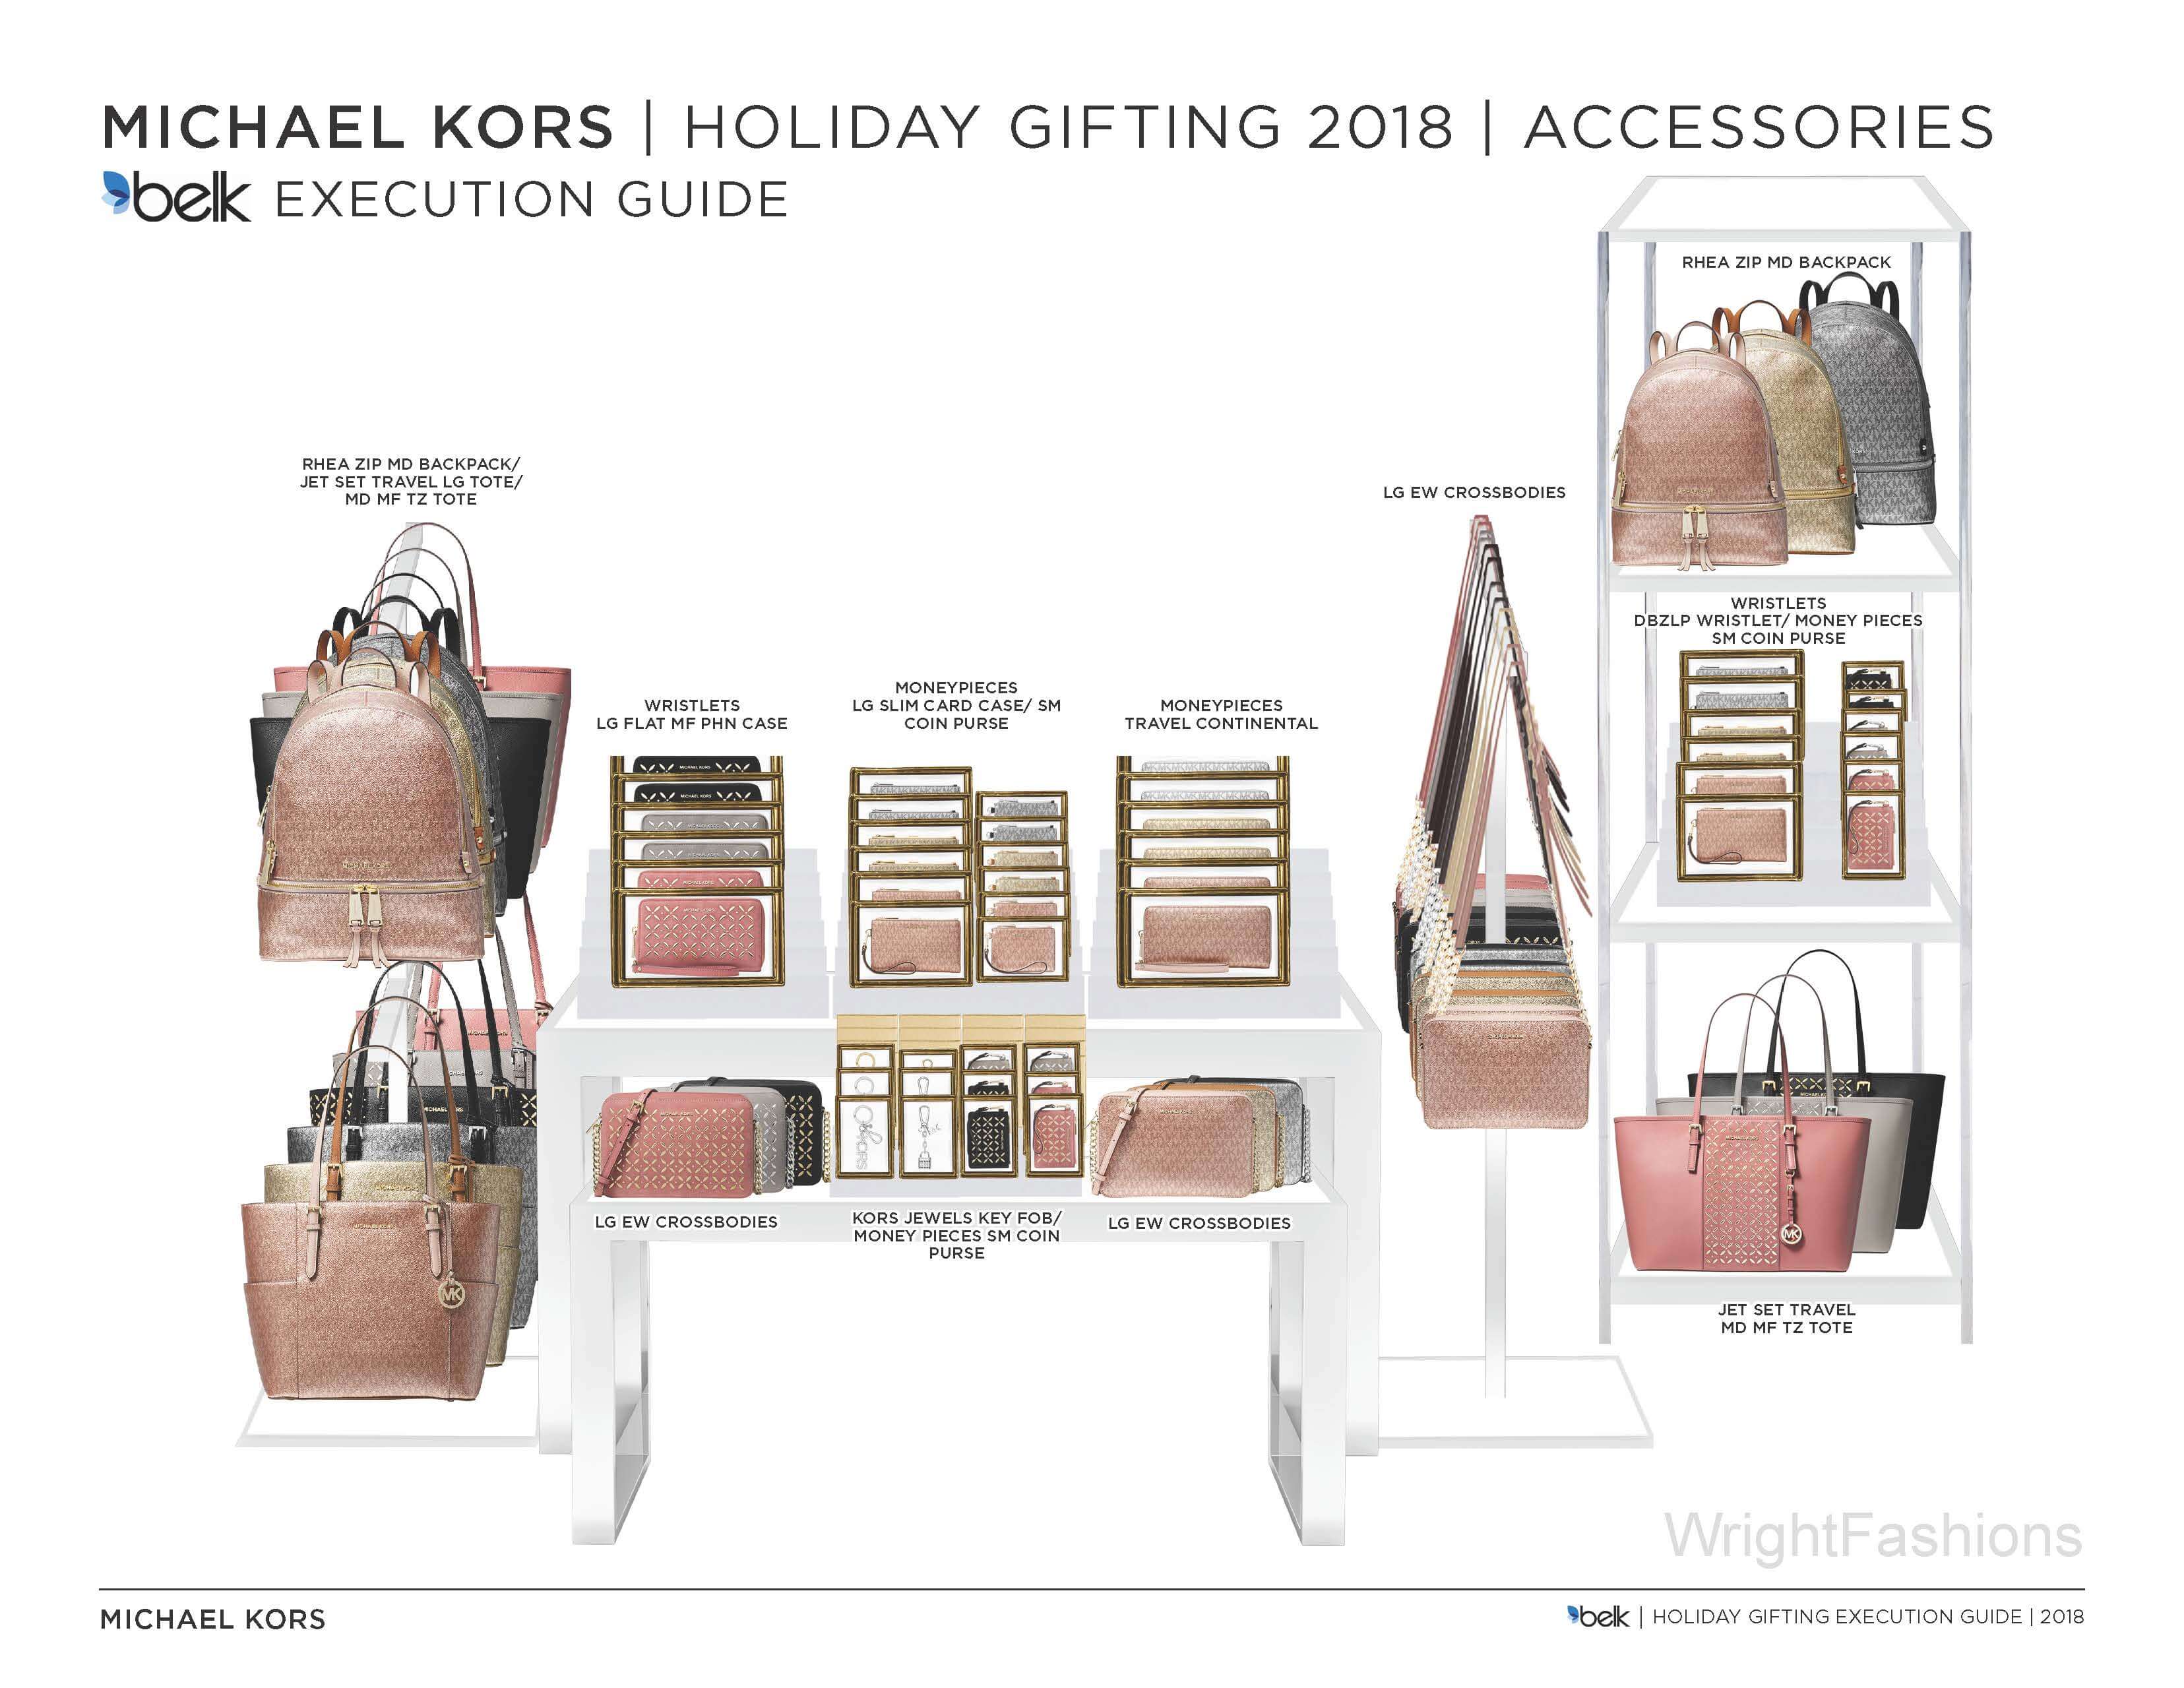 Belk directive I created for my fashion internship at Michael Kors in NYC. The picture showcases bright pink, gold, and silver handbags. There are tables showing crossbody bags and wallets to along with it.